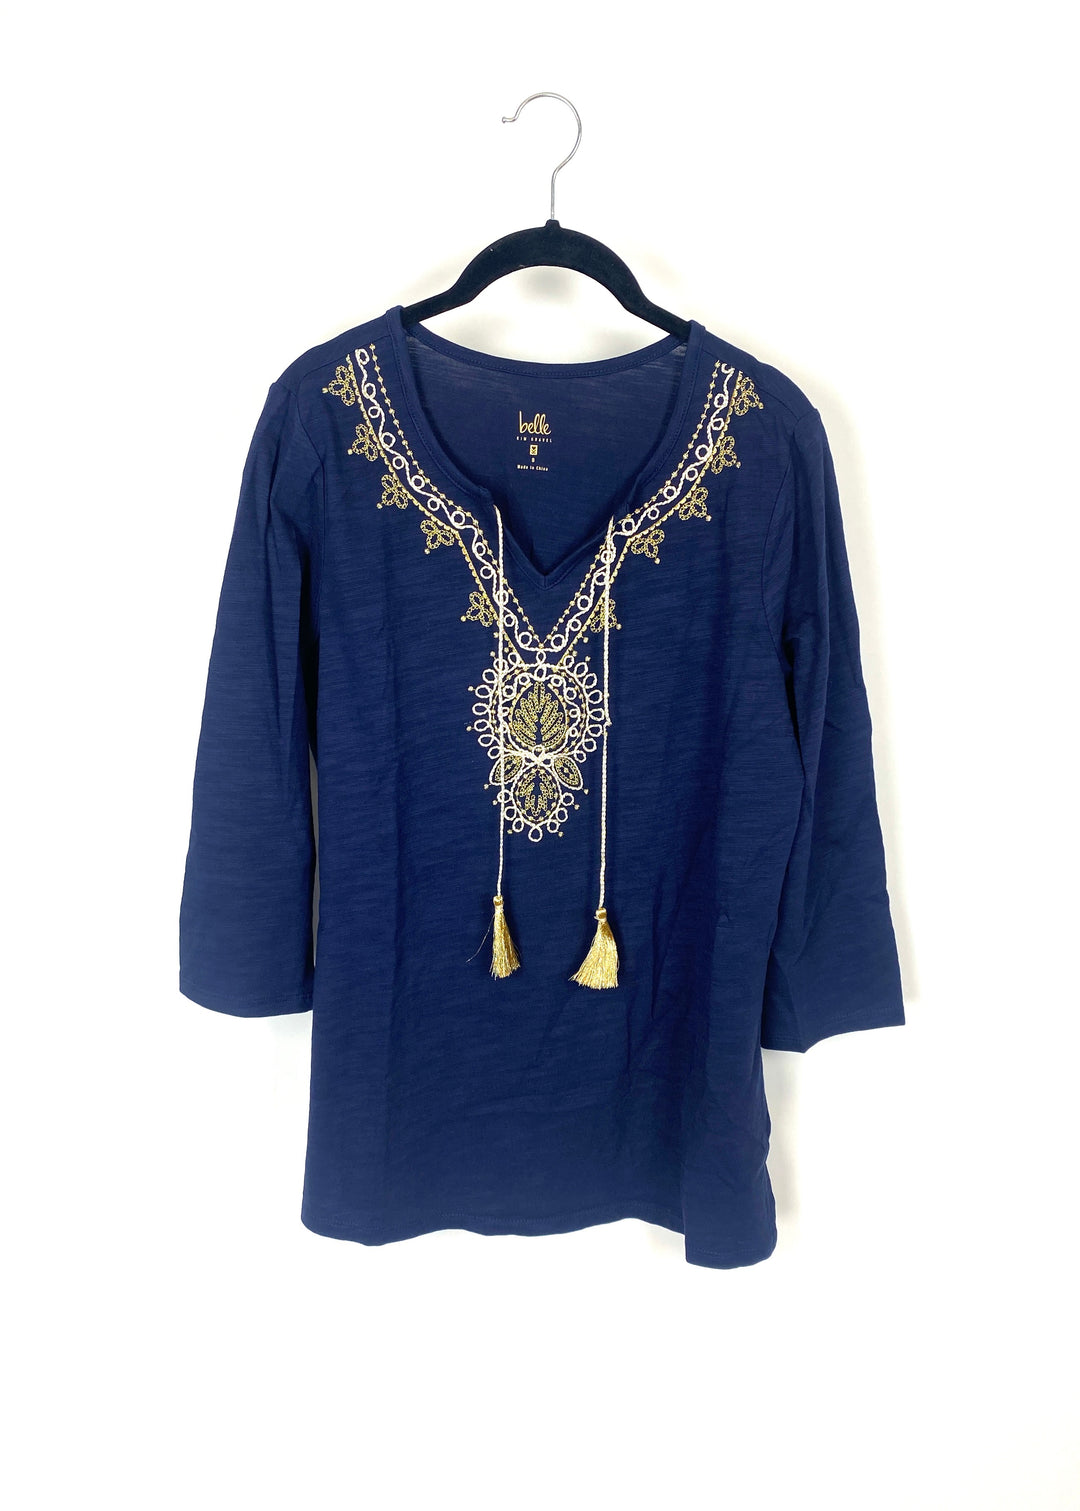 Navy Blue 3/4 Sleeve Top with White and Gold Embroidery - Small/Medium